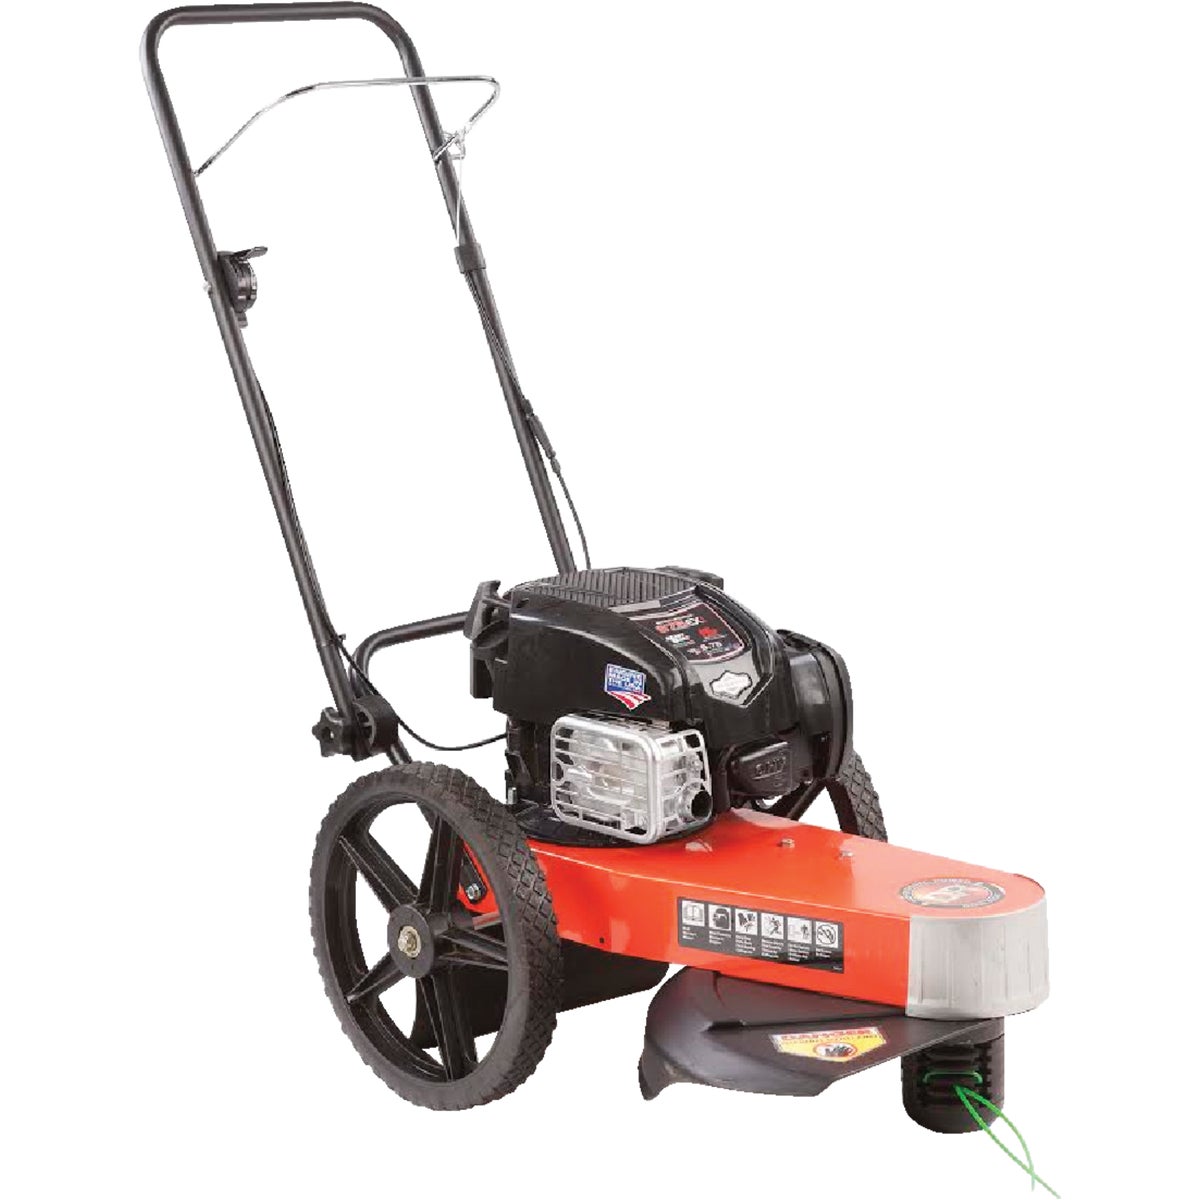 Item 704648, Premier trimmer mower will power through any trimming task and handle light